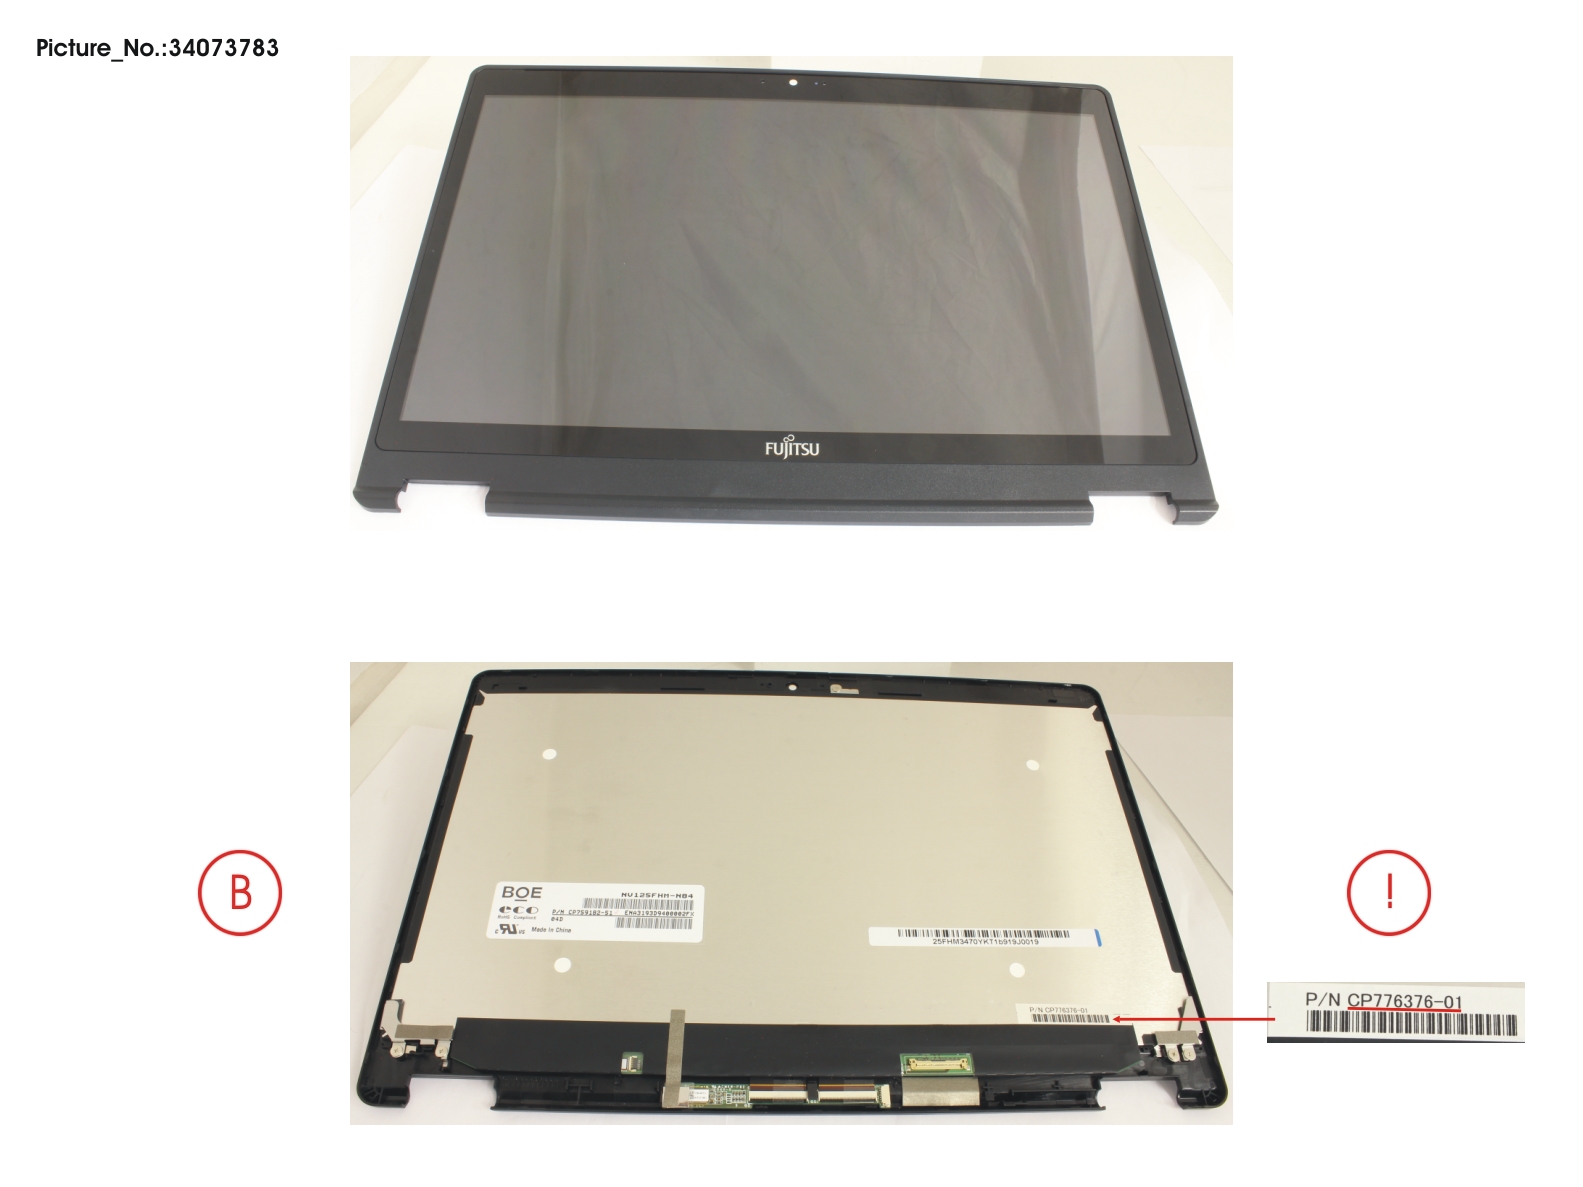 LCD ASSY FHD, G INCL.TOUCHPANEL